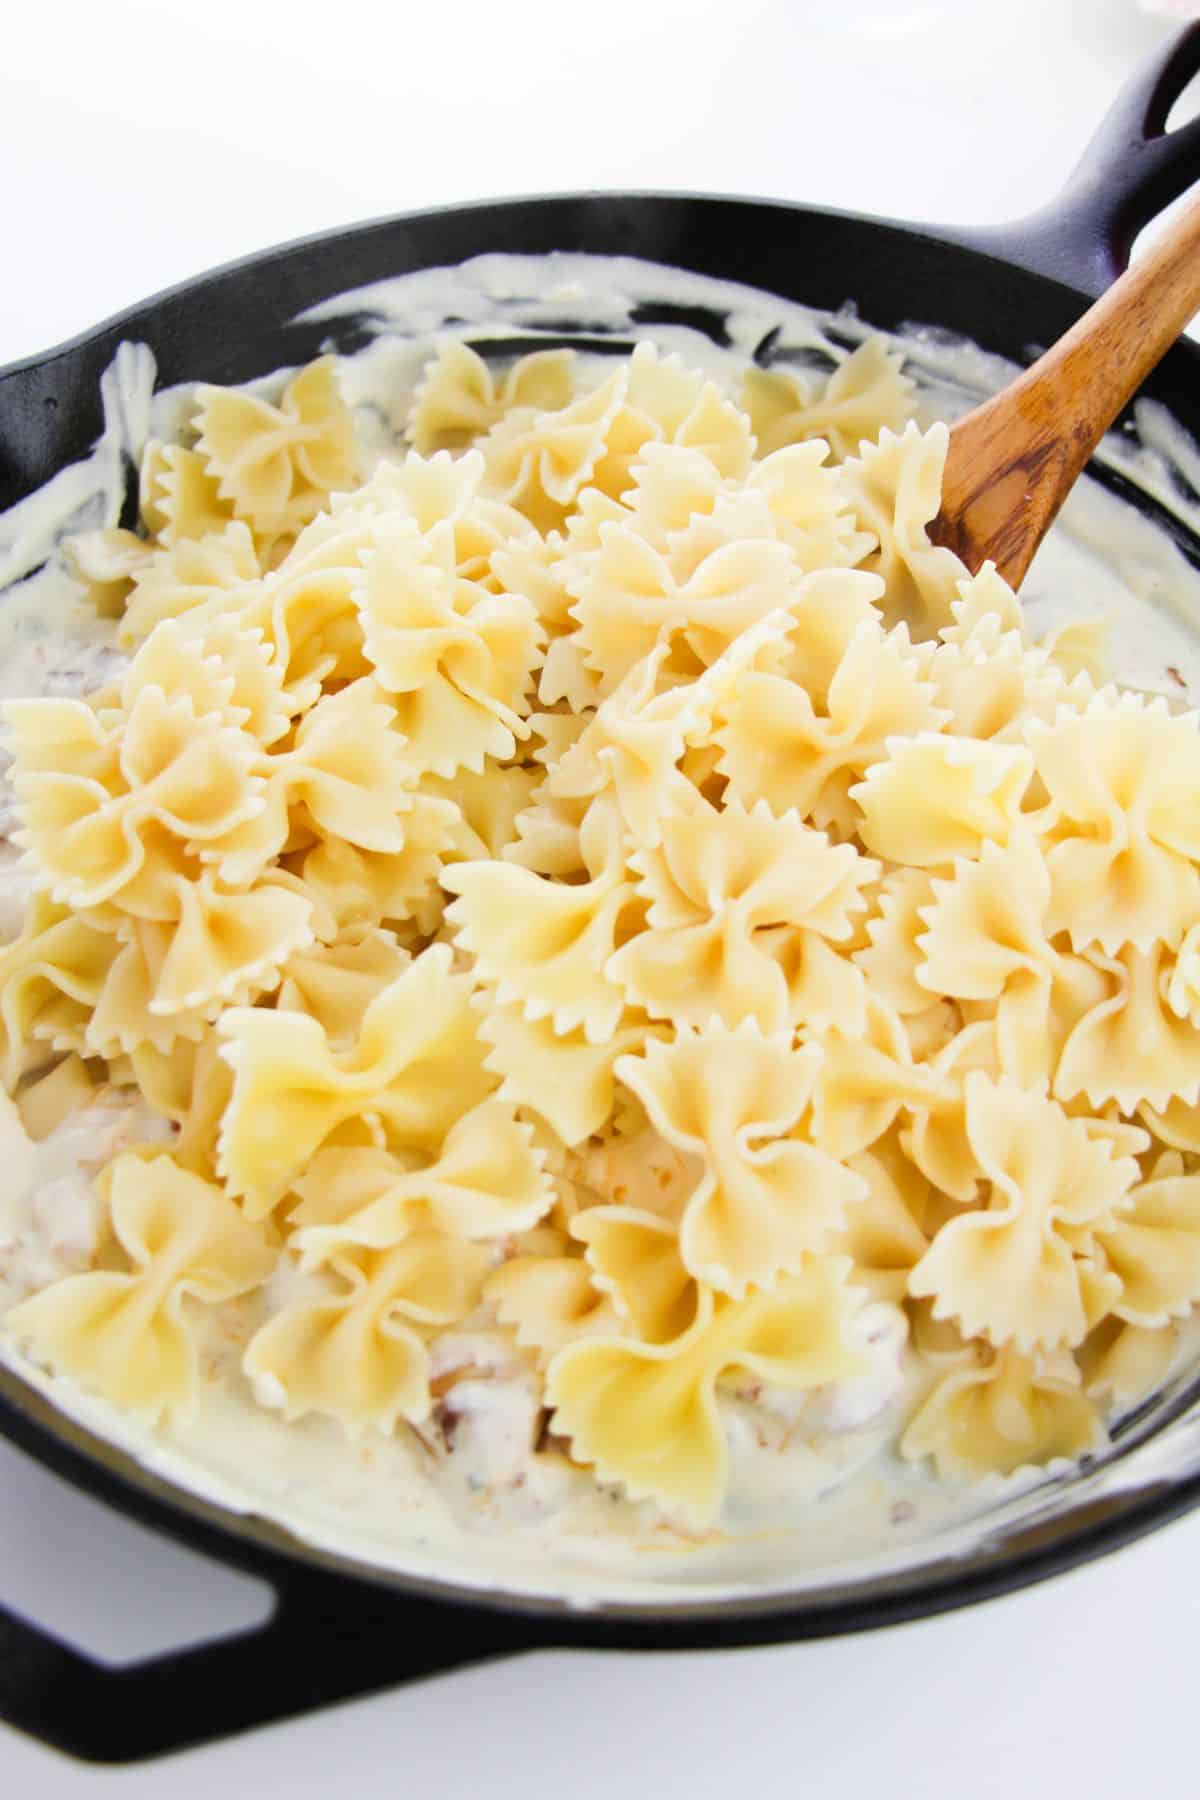 The bowtie pasta is added to the sauce mixture.